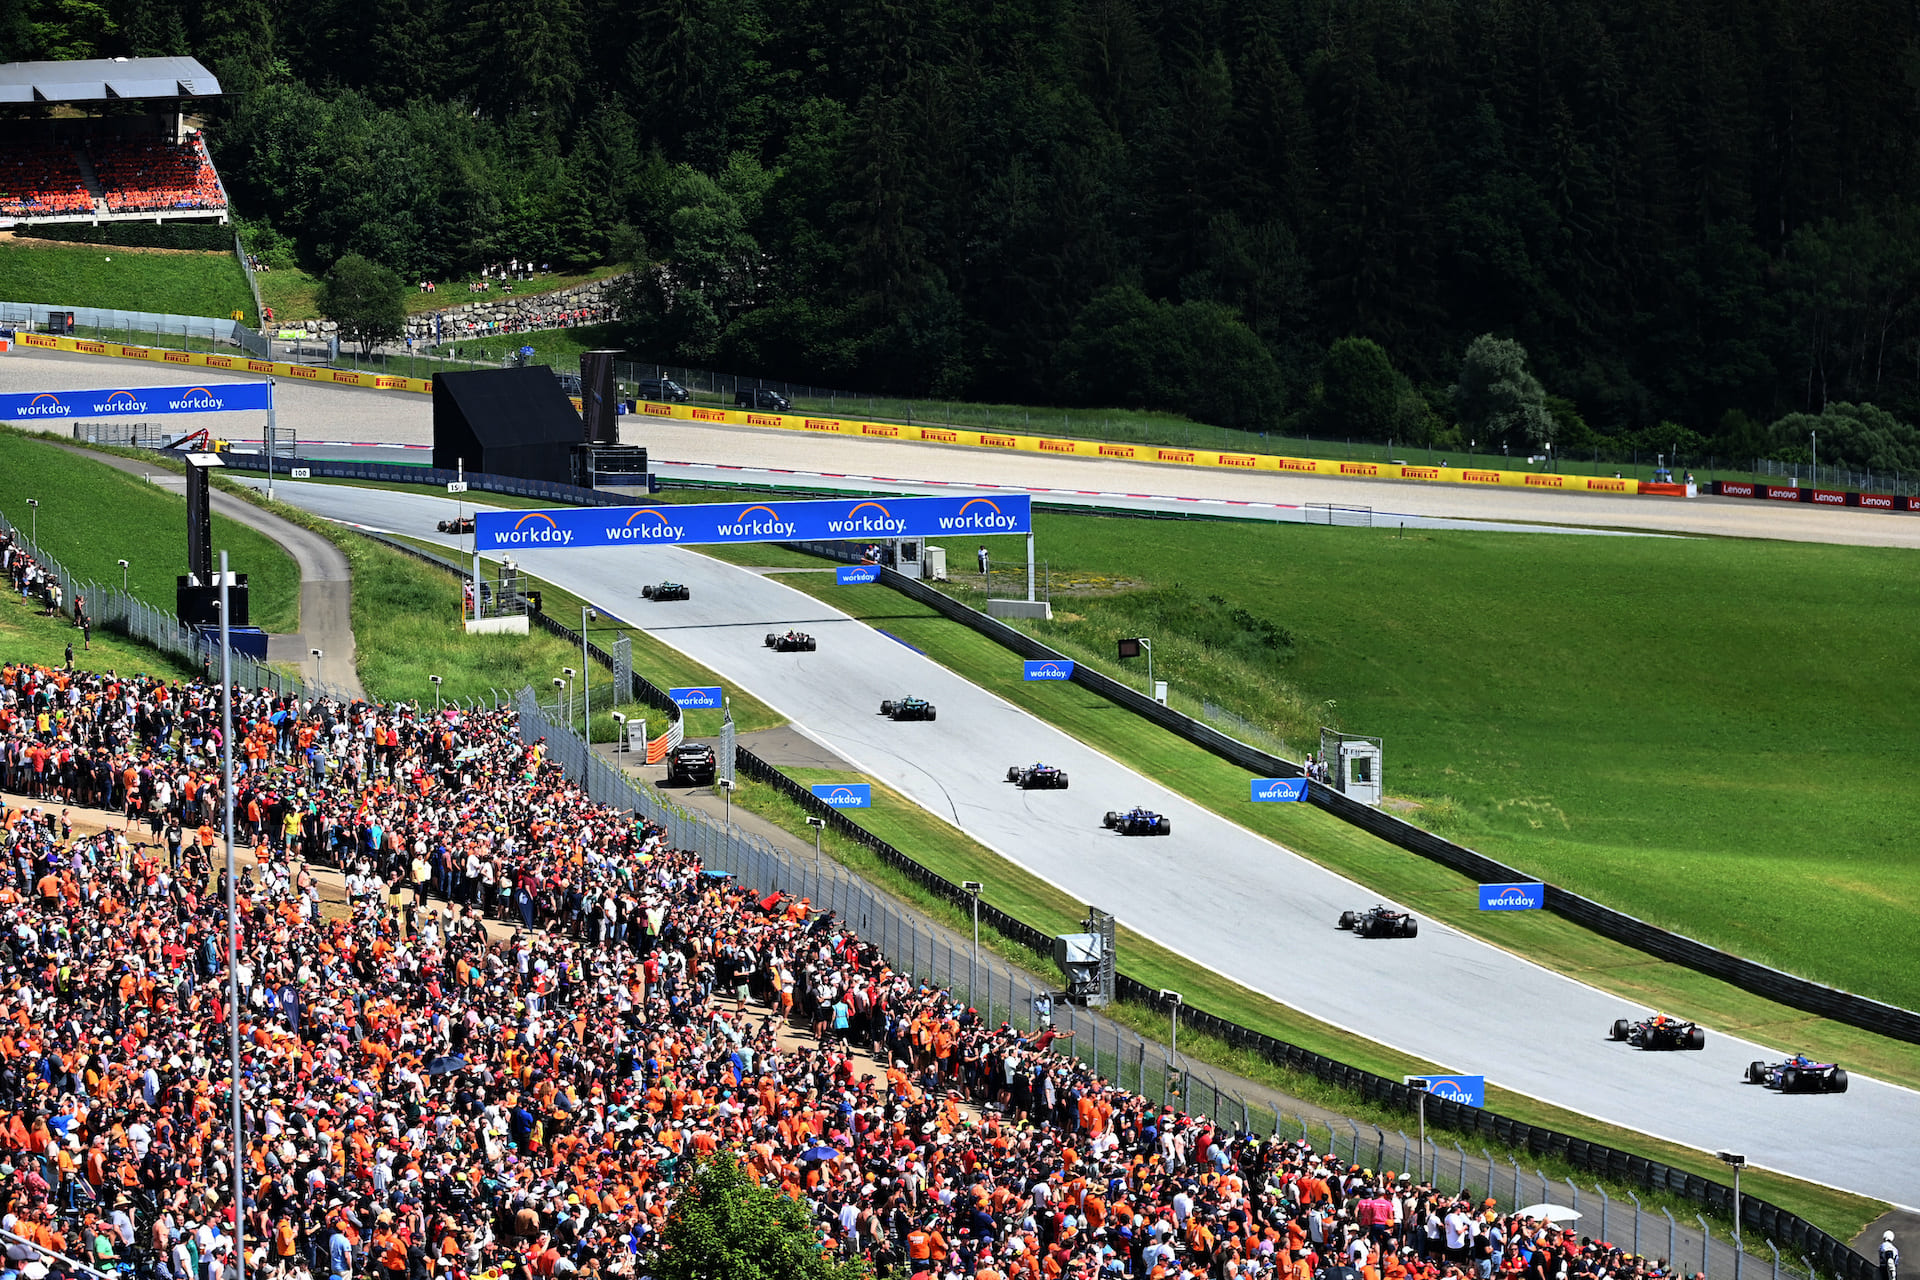 Formula 1 tickets a fan's guide to planning a Grand Prix trip